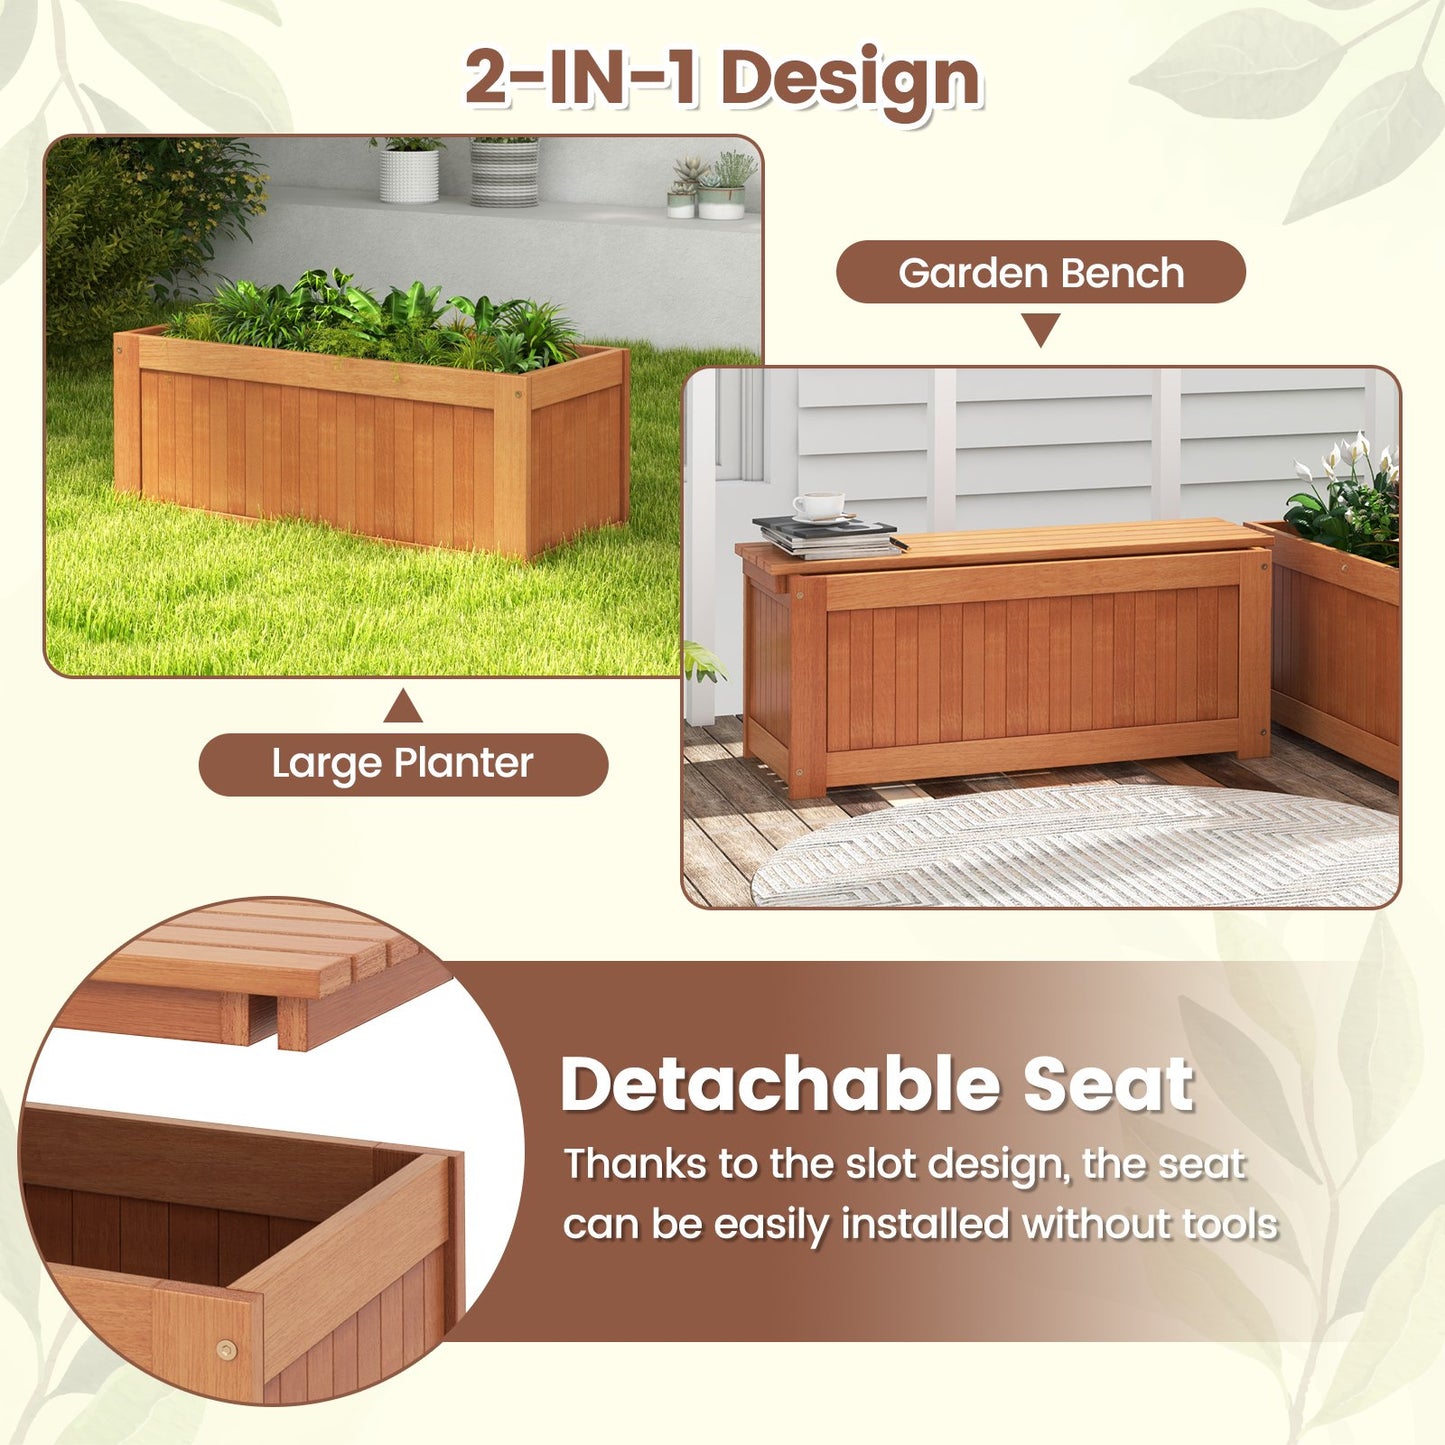 Outdoor Plant Container with Seat for Garden Yard Balcony Deck, Natural